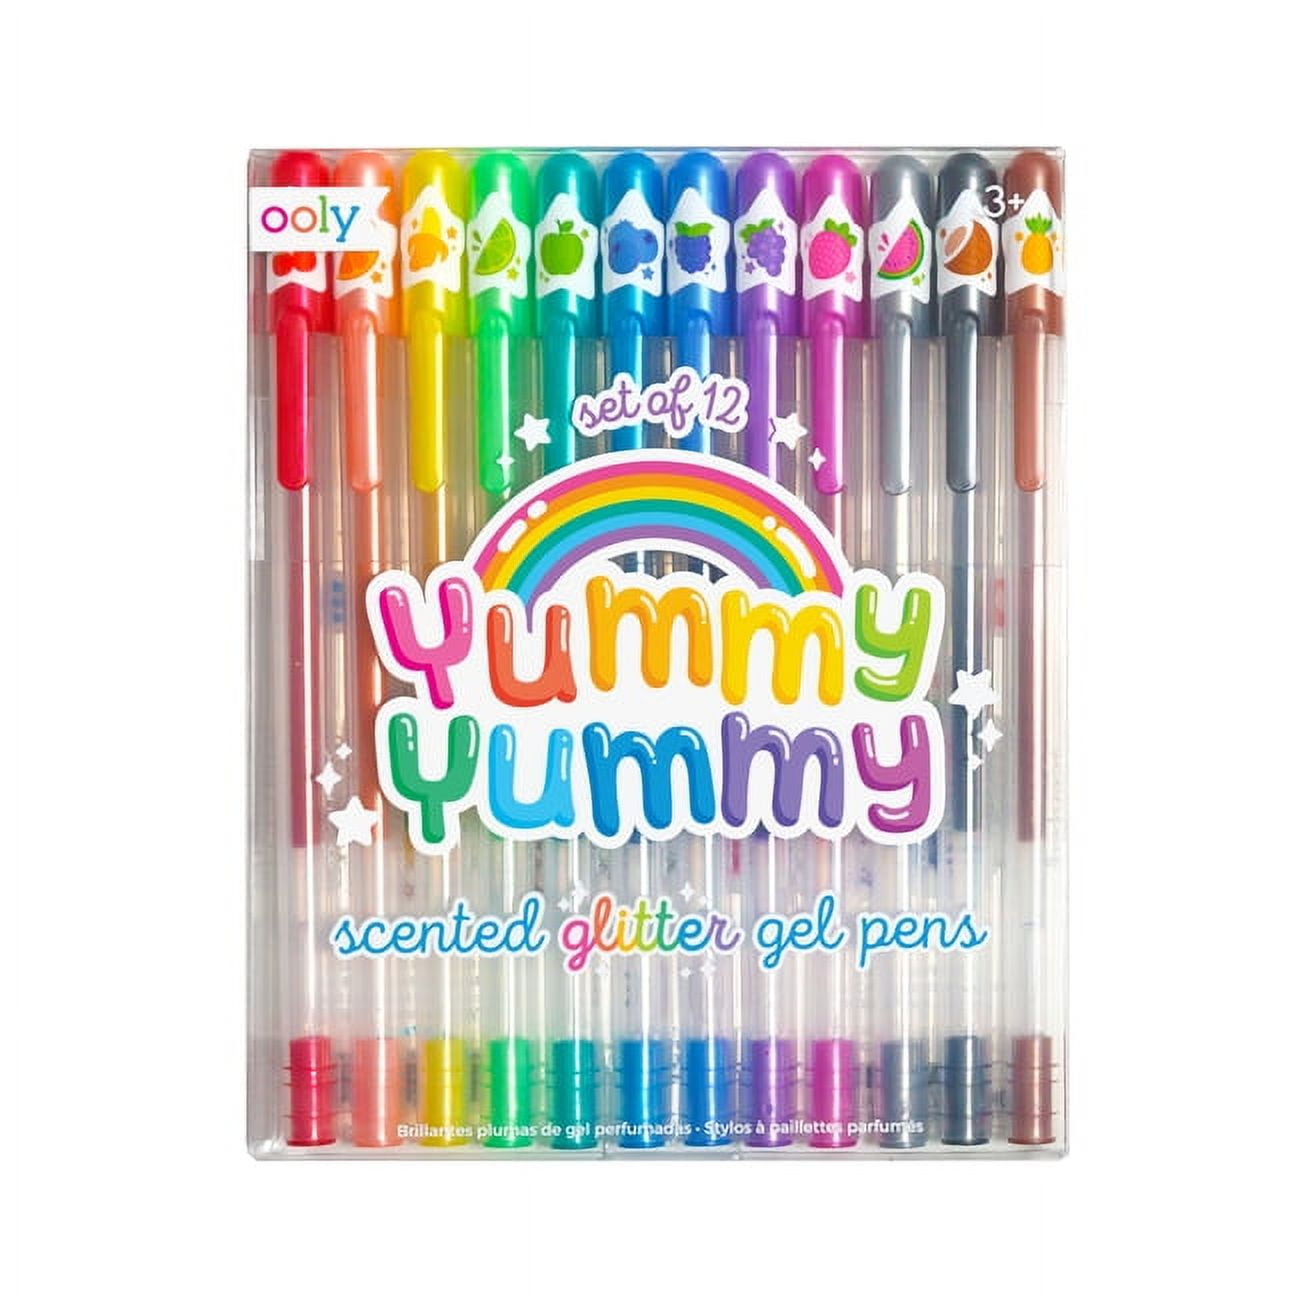 Yummy Yummy Scented Glitter Gel Pens 2.0 - Set of 12 - The Blue House